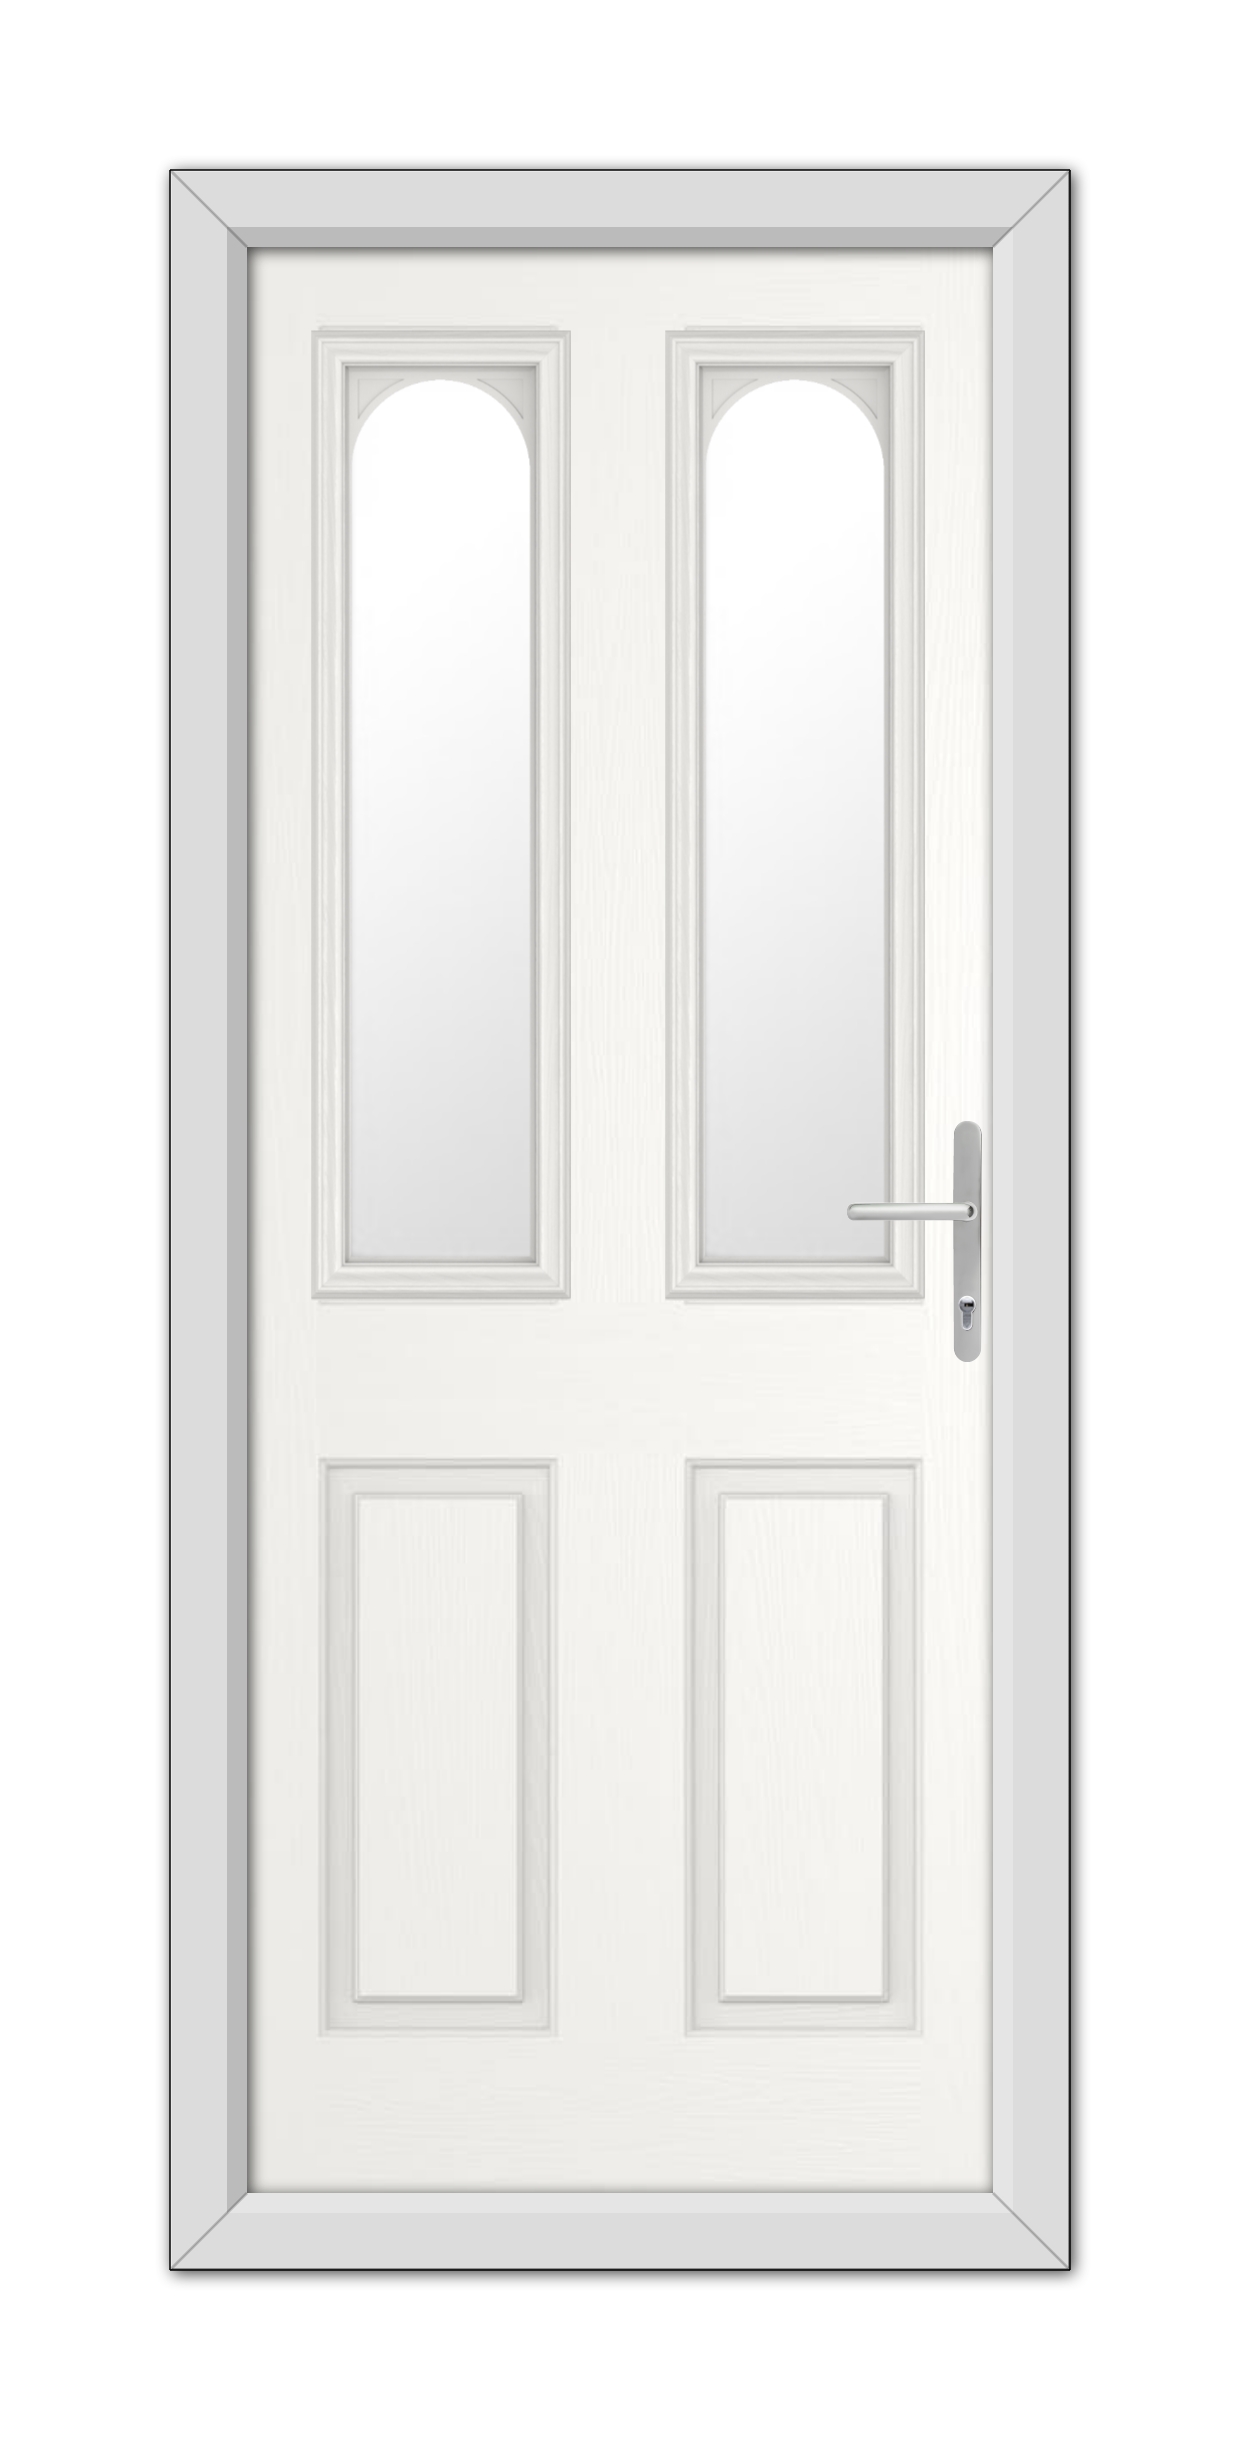 A White Elmhurst Composite Door 48mm Timber Core with glass panels on the top half and wood panels on the bottom half, featuring a simple silver handle on the right.